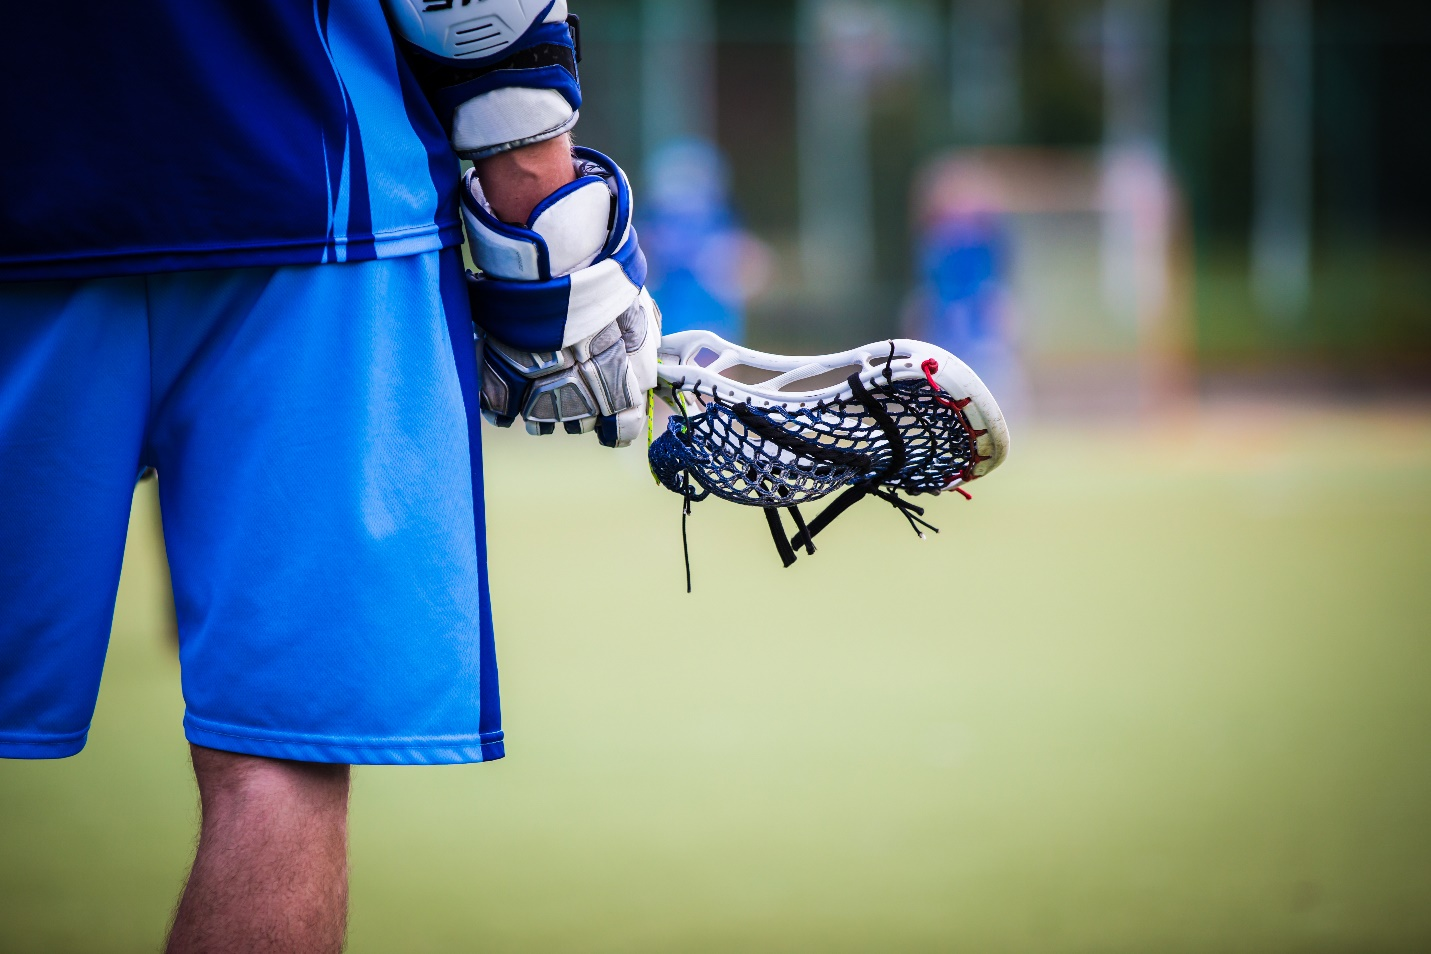 A lacrosse player holding a lacrosse stick